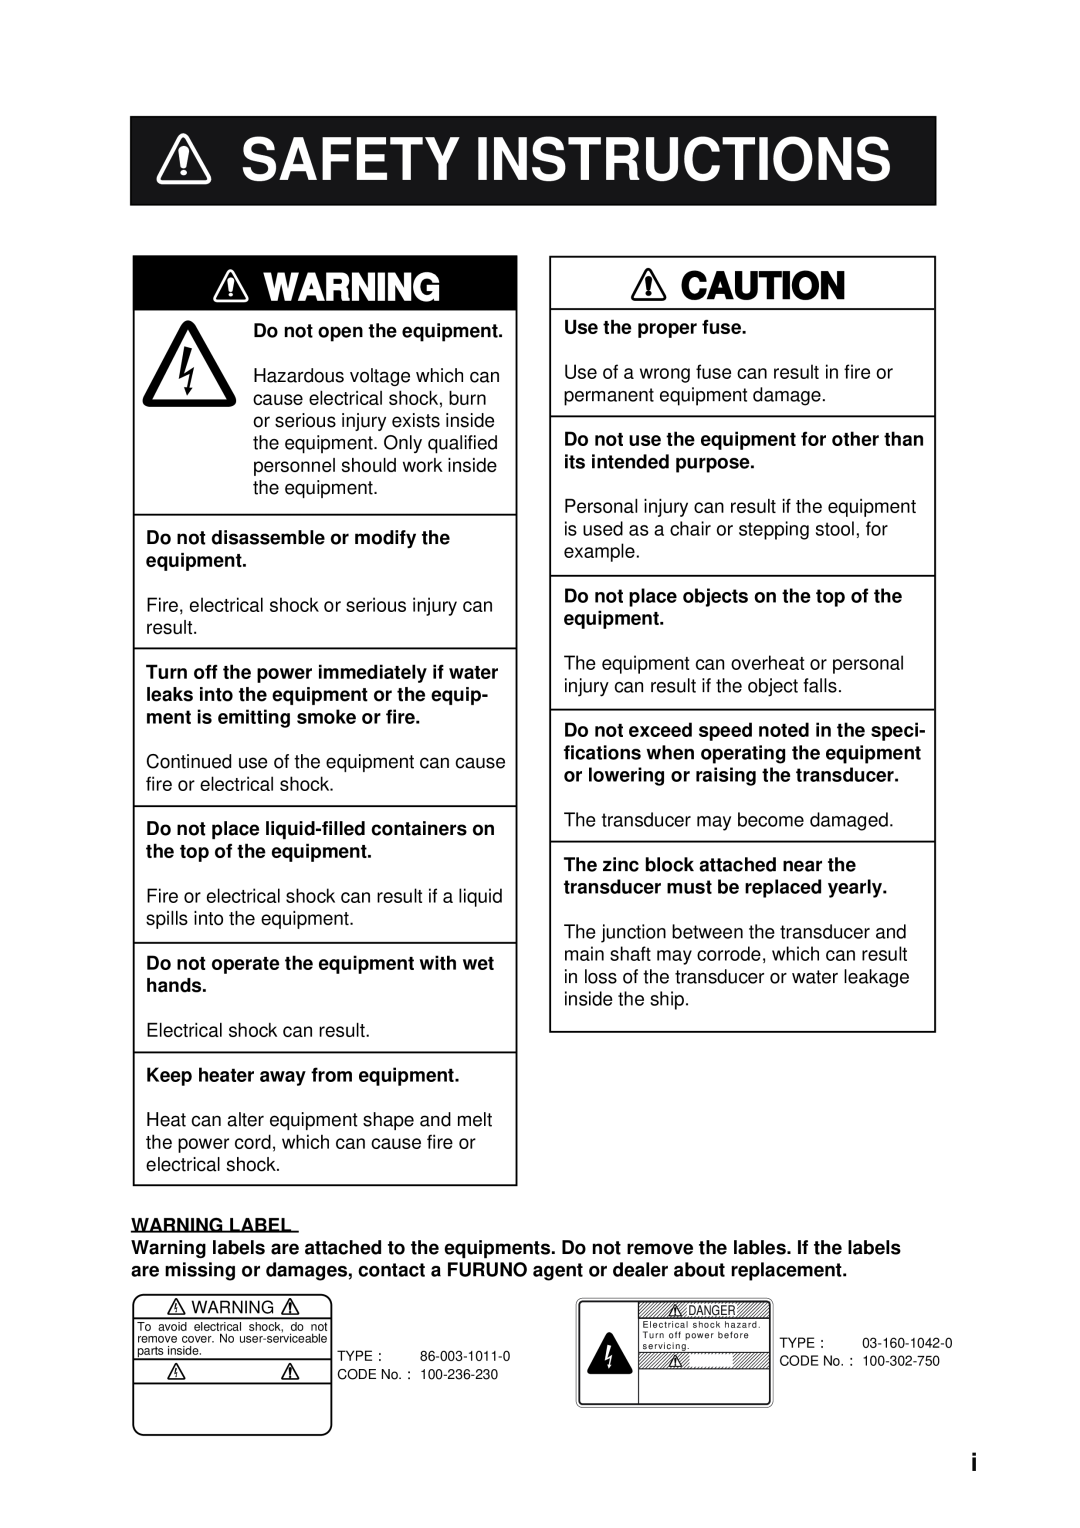 Furuno CSH-53 Safety Instructions, Do not open the equipment, Do not disassemble or modify the equipment, Warning Label 